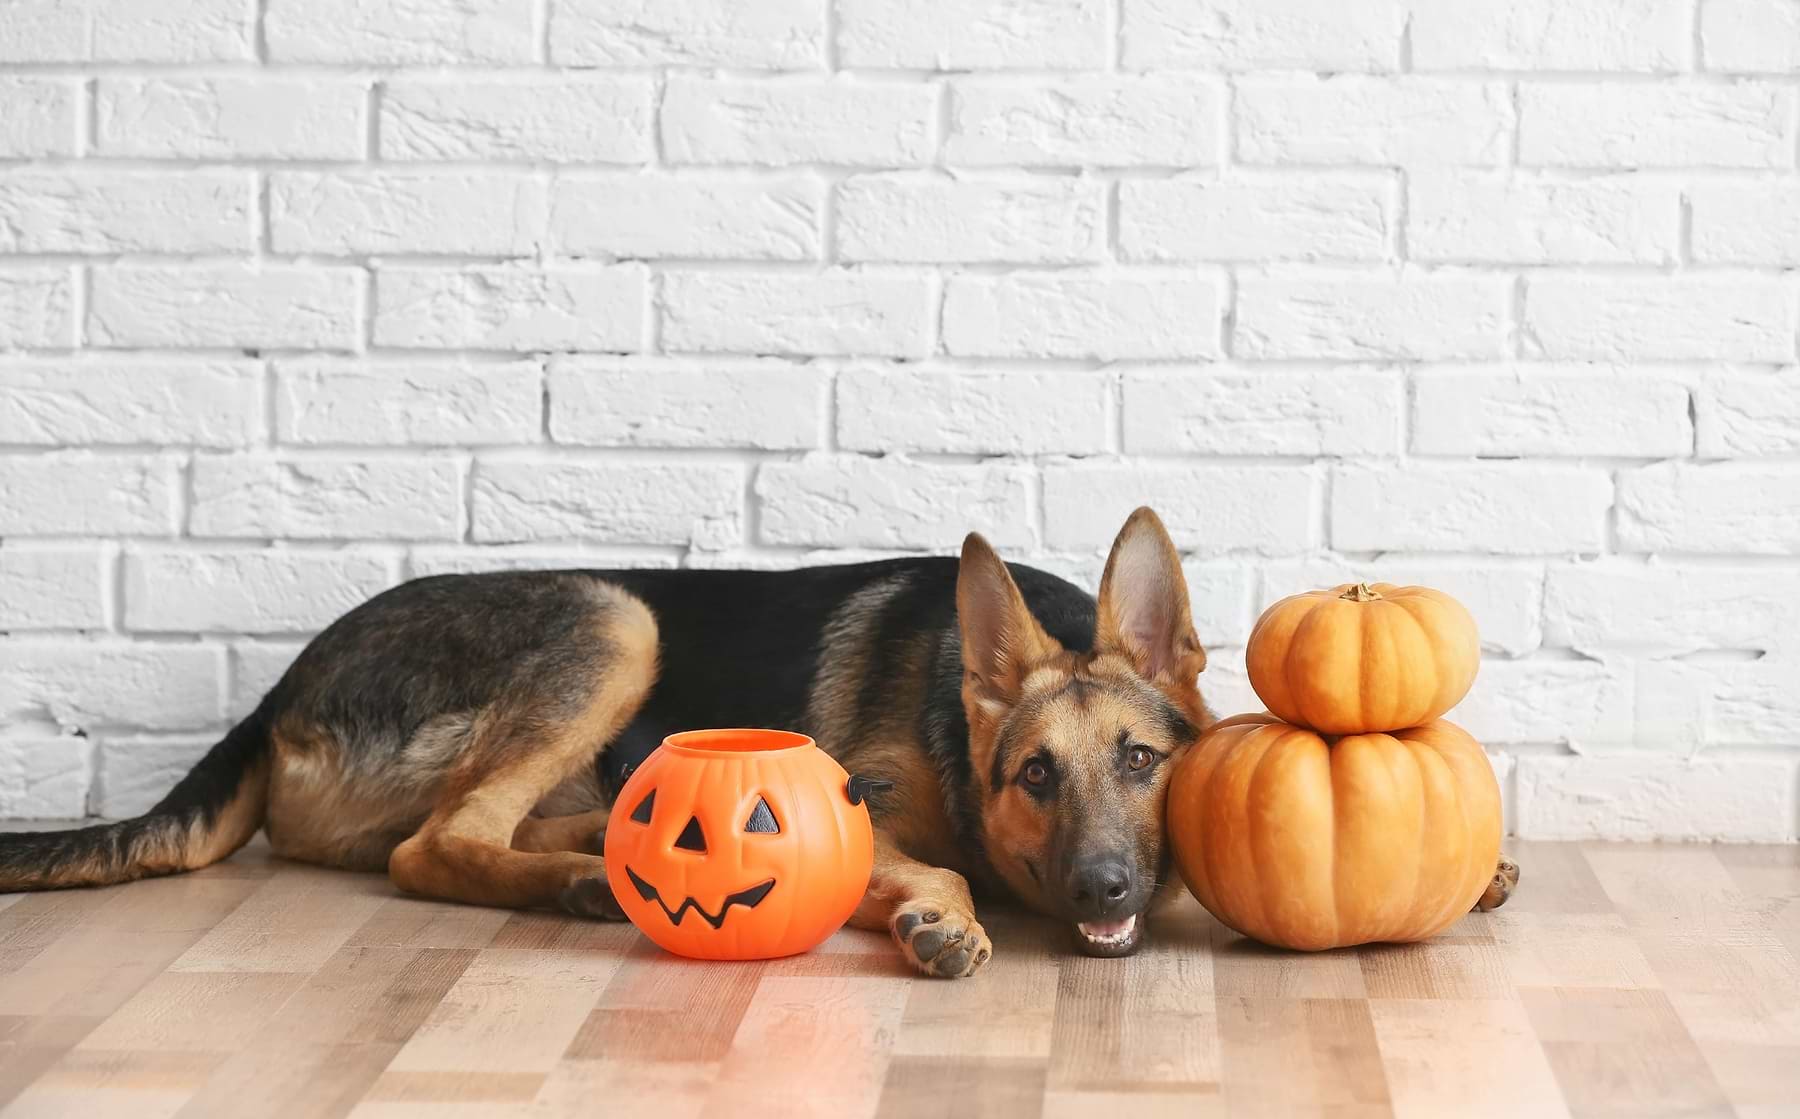 A black and brown dog, lying next to 2 pumpkins and 1 trick or treat basket for Halloween.